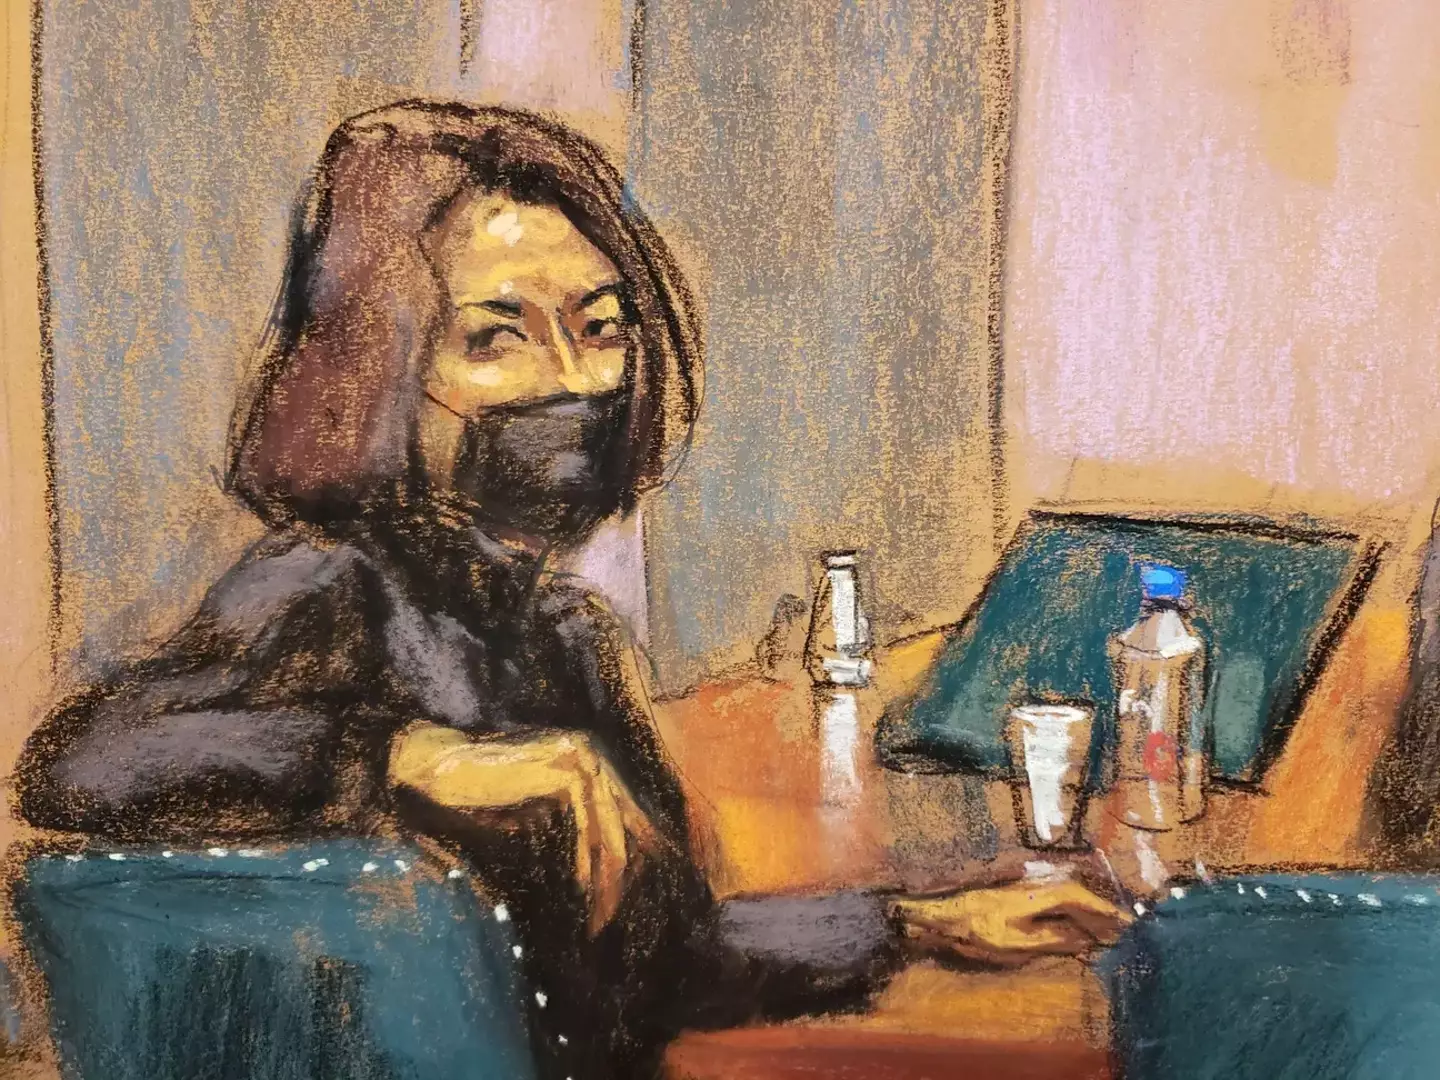 Maxwell as depicted in a courtroom sketch during her trial.